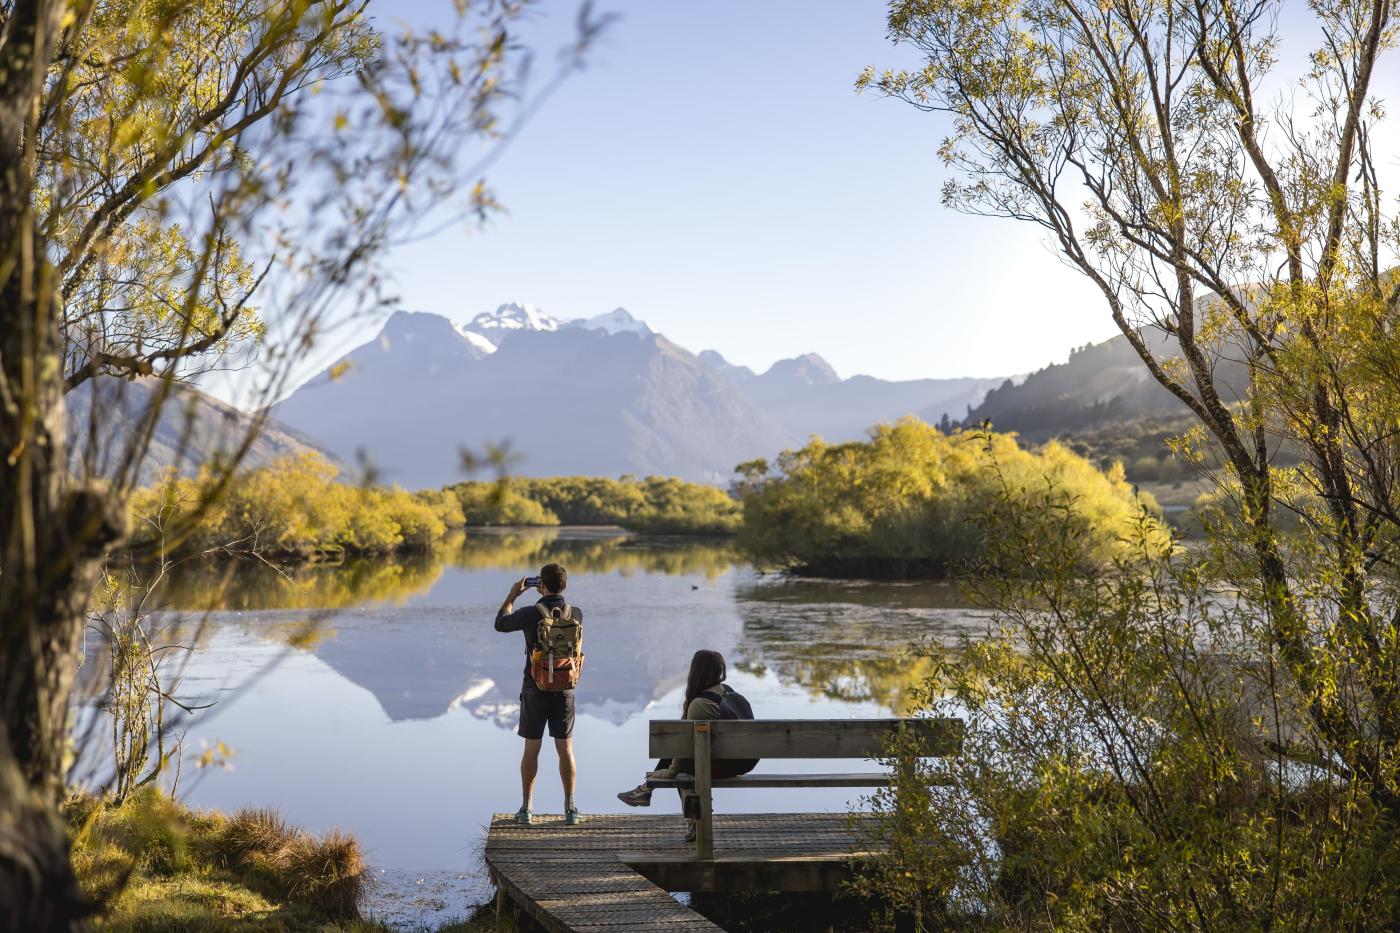 People enjoying the views of lake and mountains at the Glenorchy Lagoon Walkway